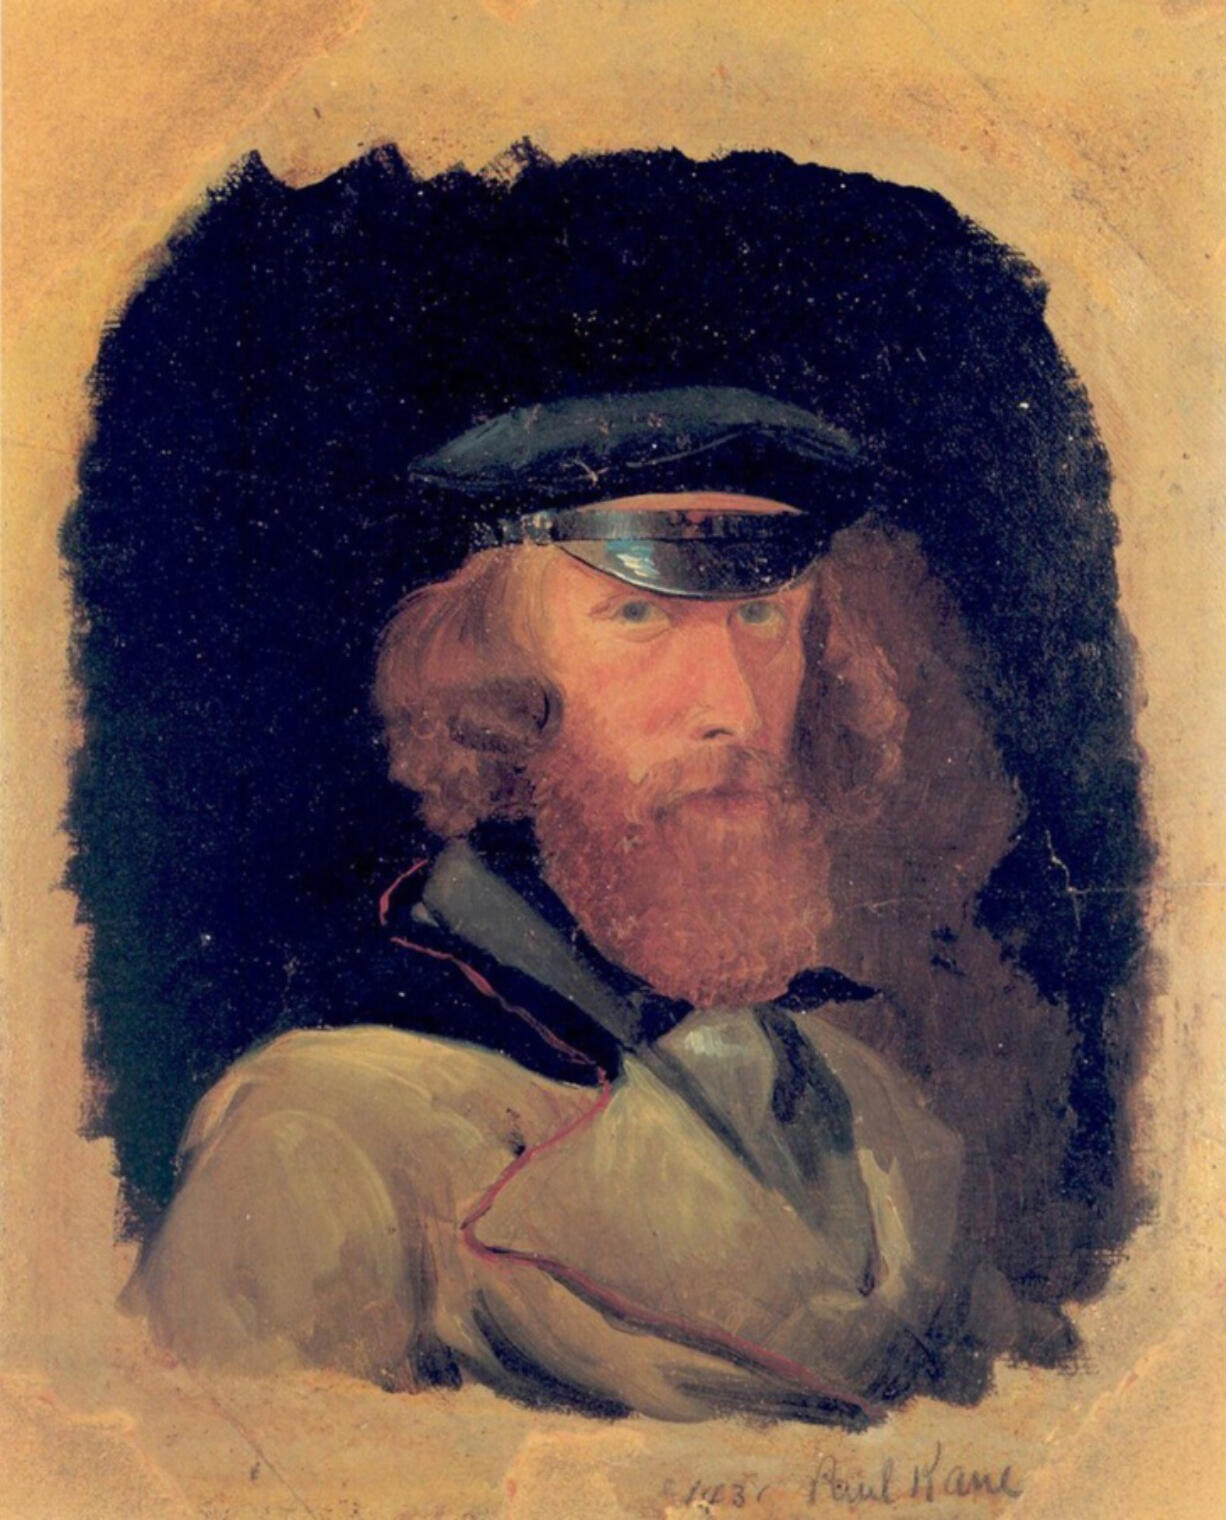 A self-portrait of Paul Kane (1810-1871), who sketched and painted First Nations and Metis people on trips across Canada and later through America&rsquo;s Hudson&rsquo;s Bay Company territory in 1846-1847, staying at Fort Vancouver for several months.